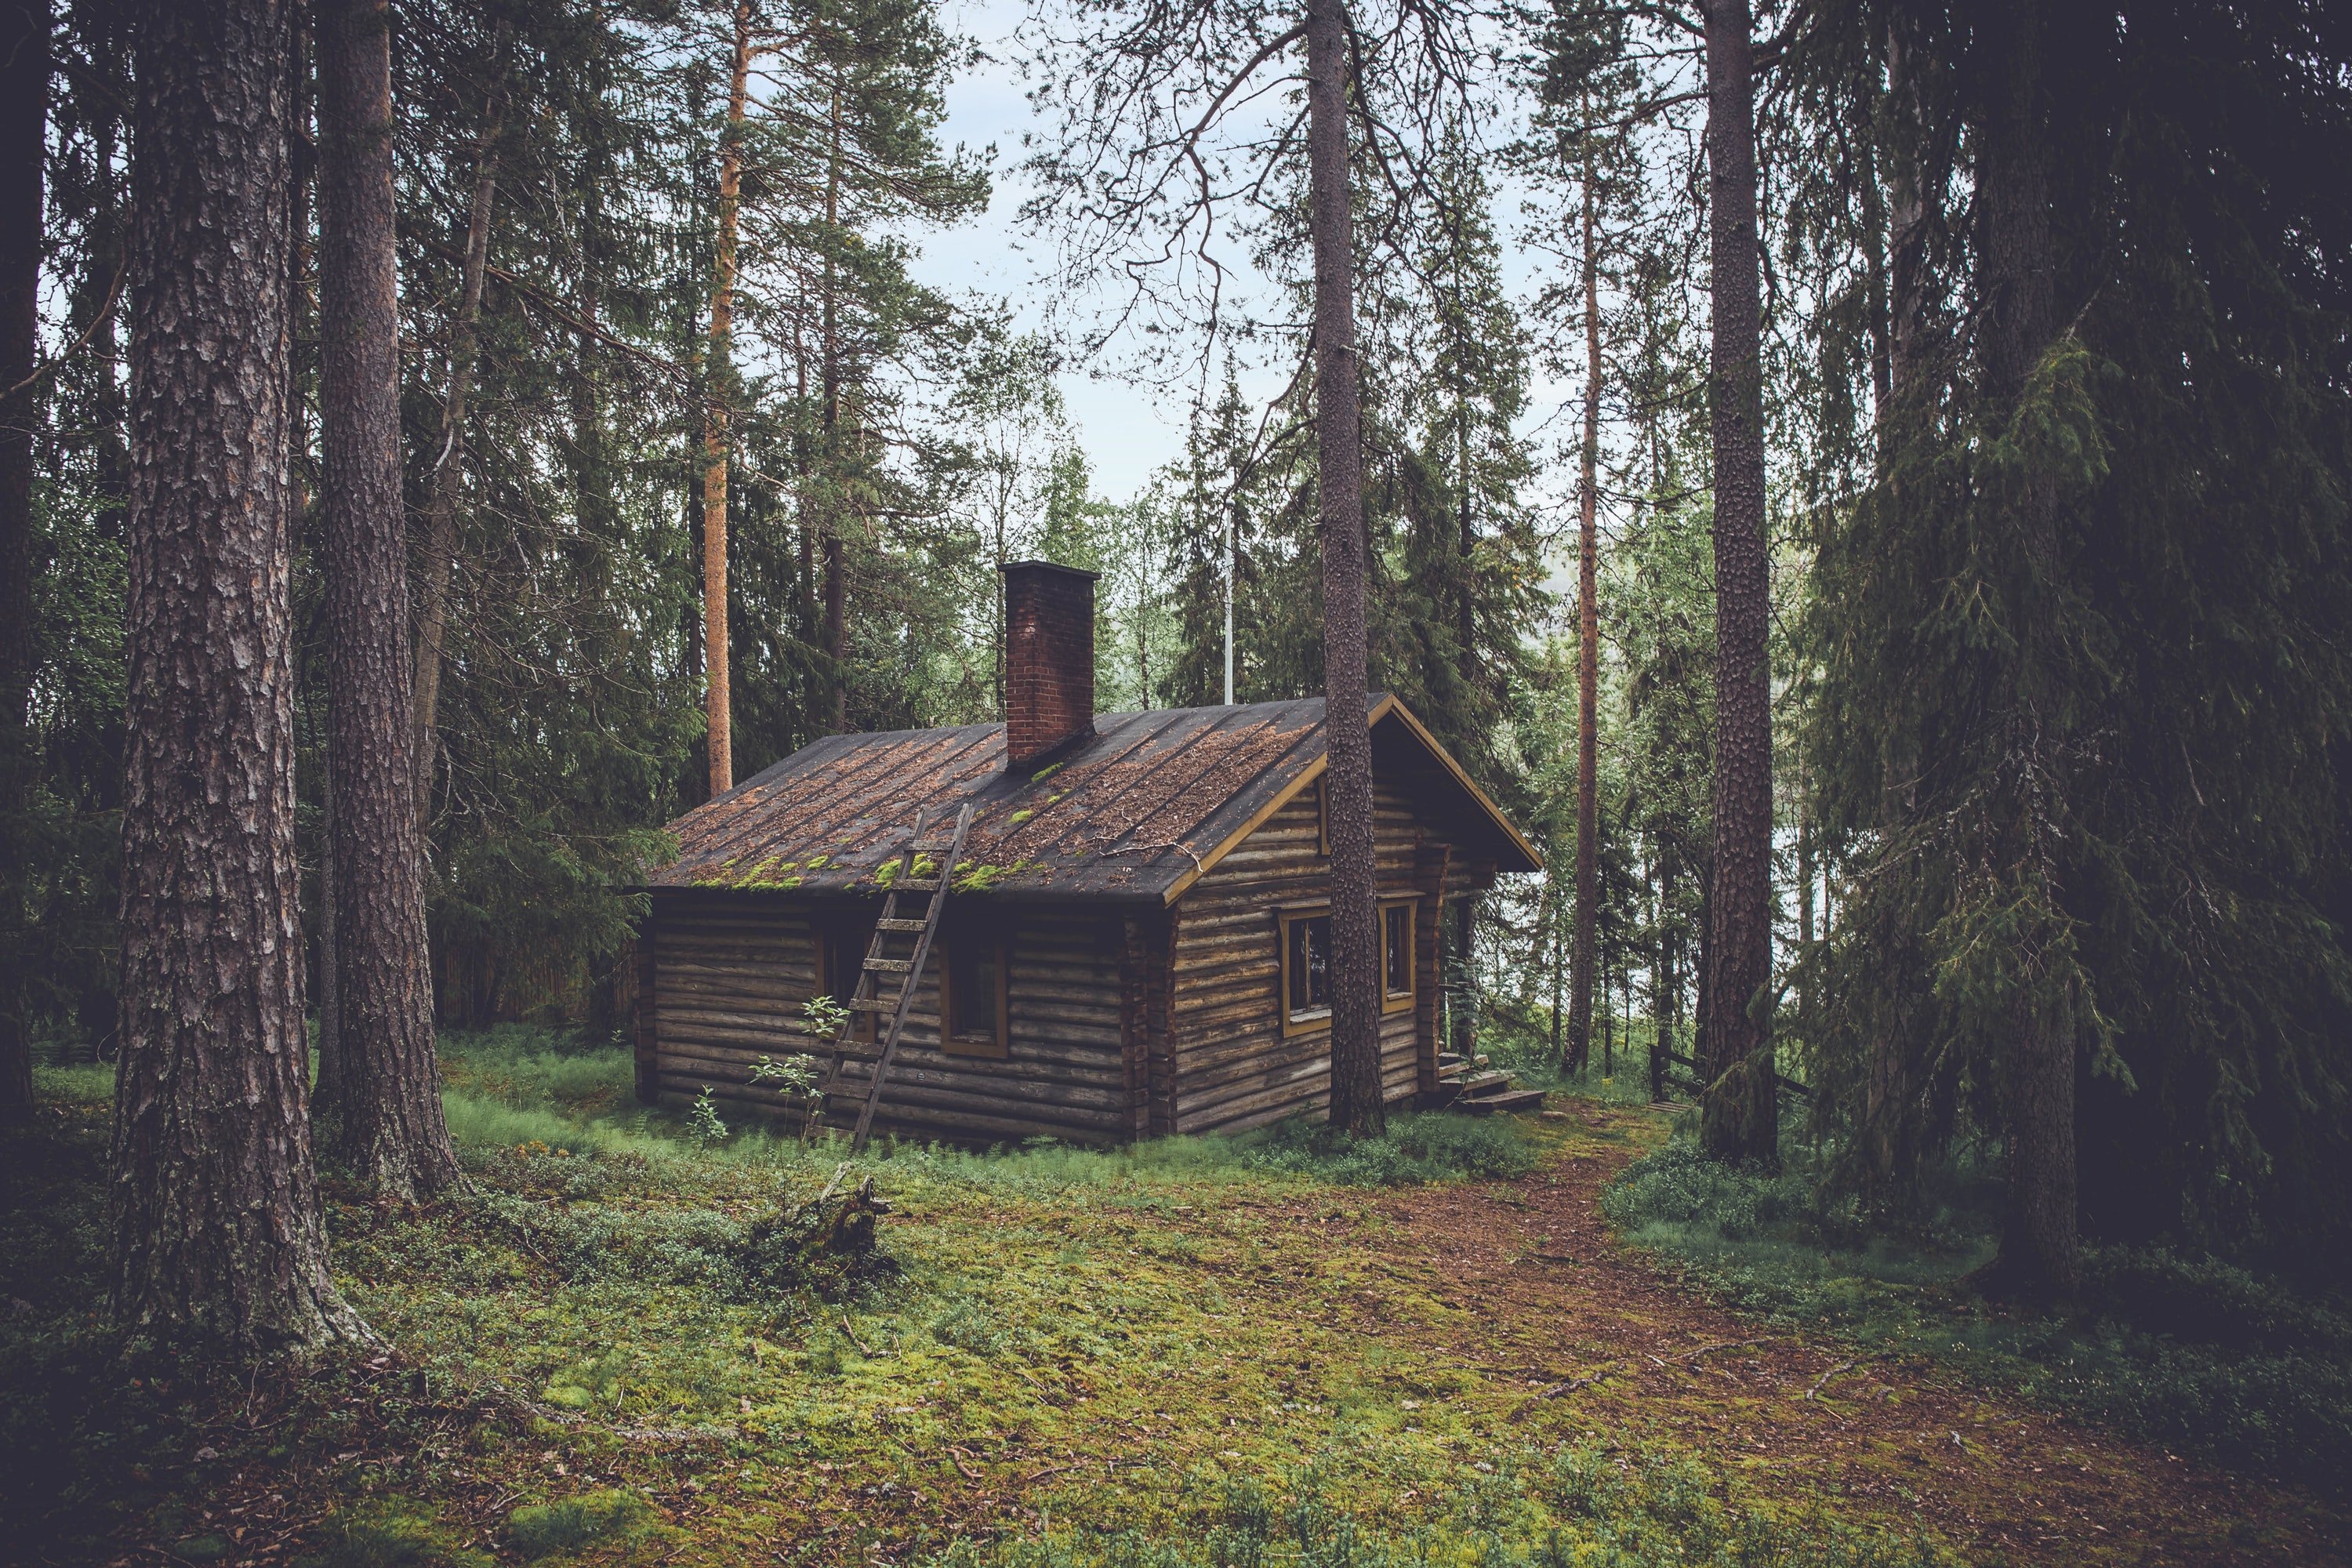 Mike followed the boy's footsteps & reached an old cabin in the woods. | Source: Unsplash